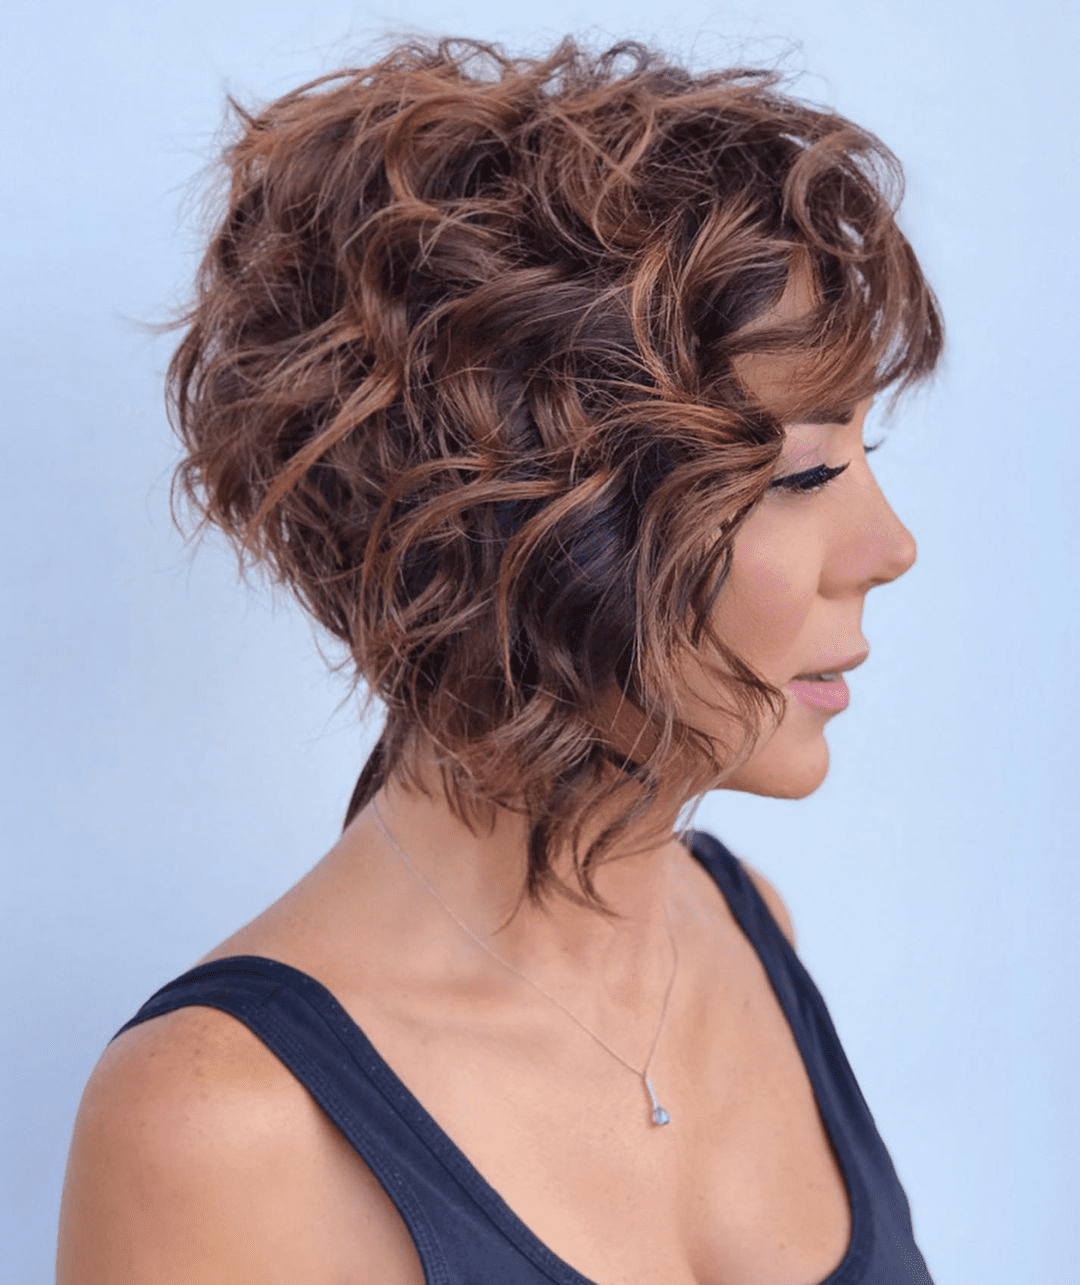 A Bold and Versatile Hairstyle that Makes a Fashionable Statement